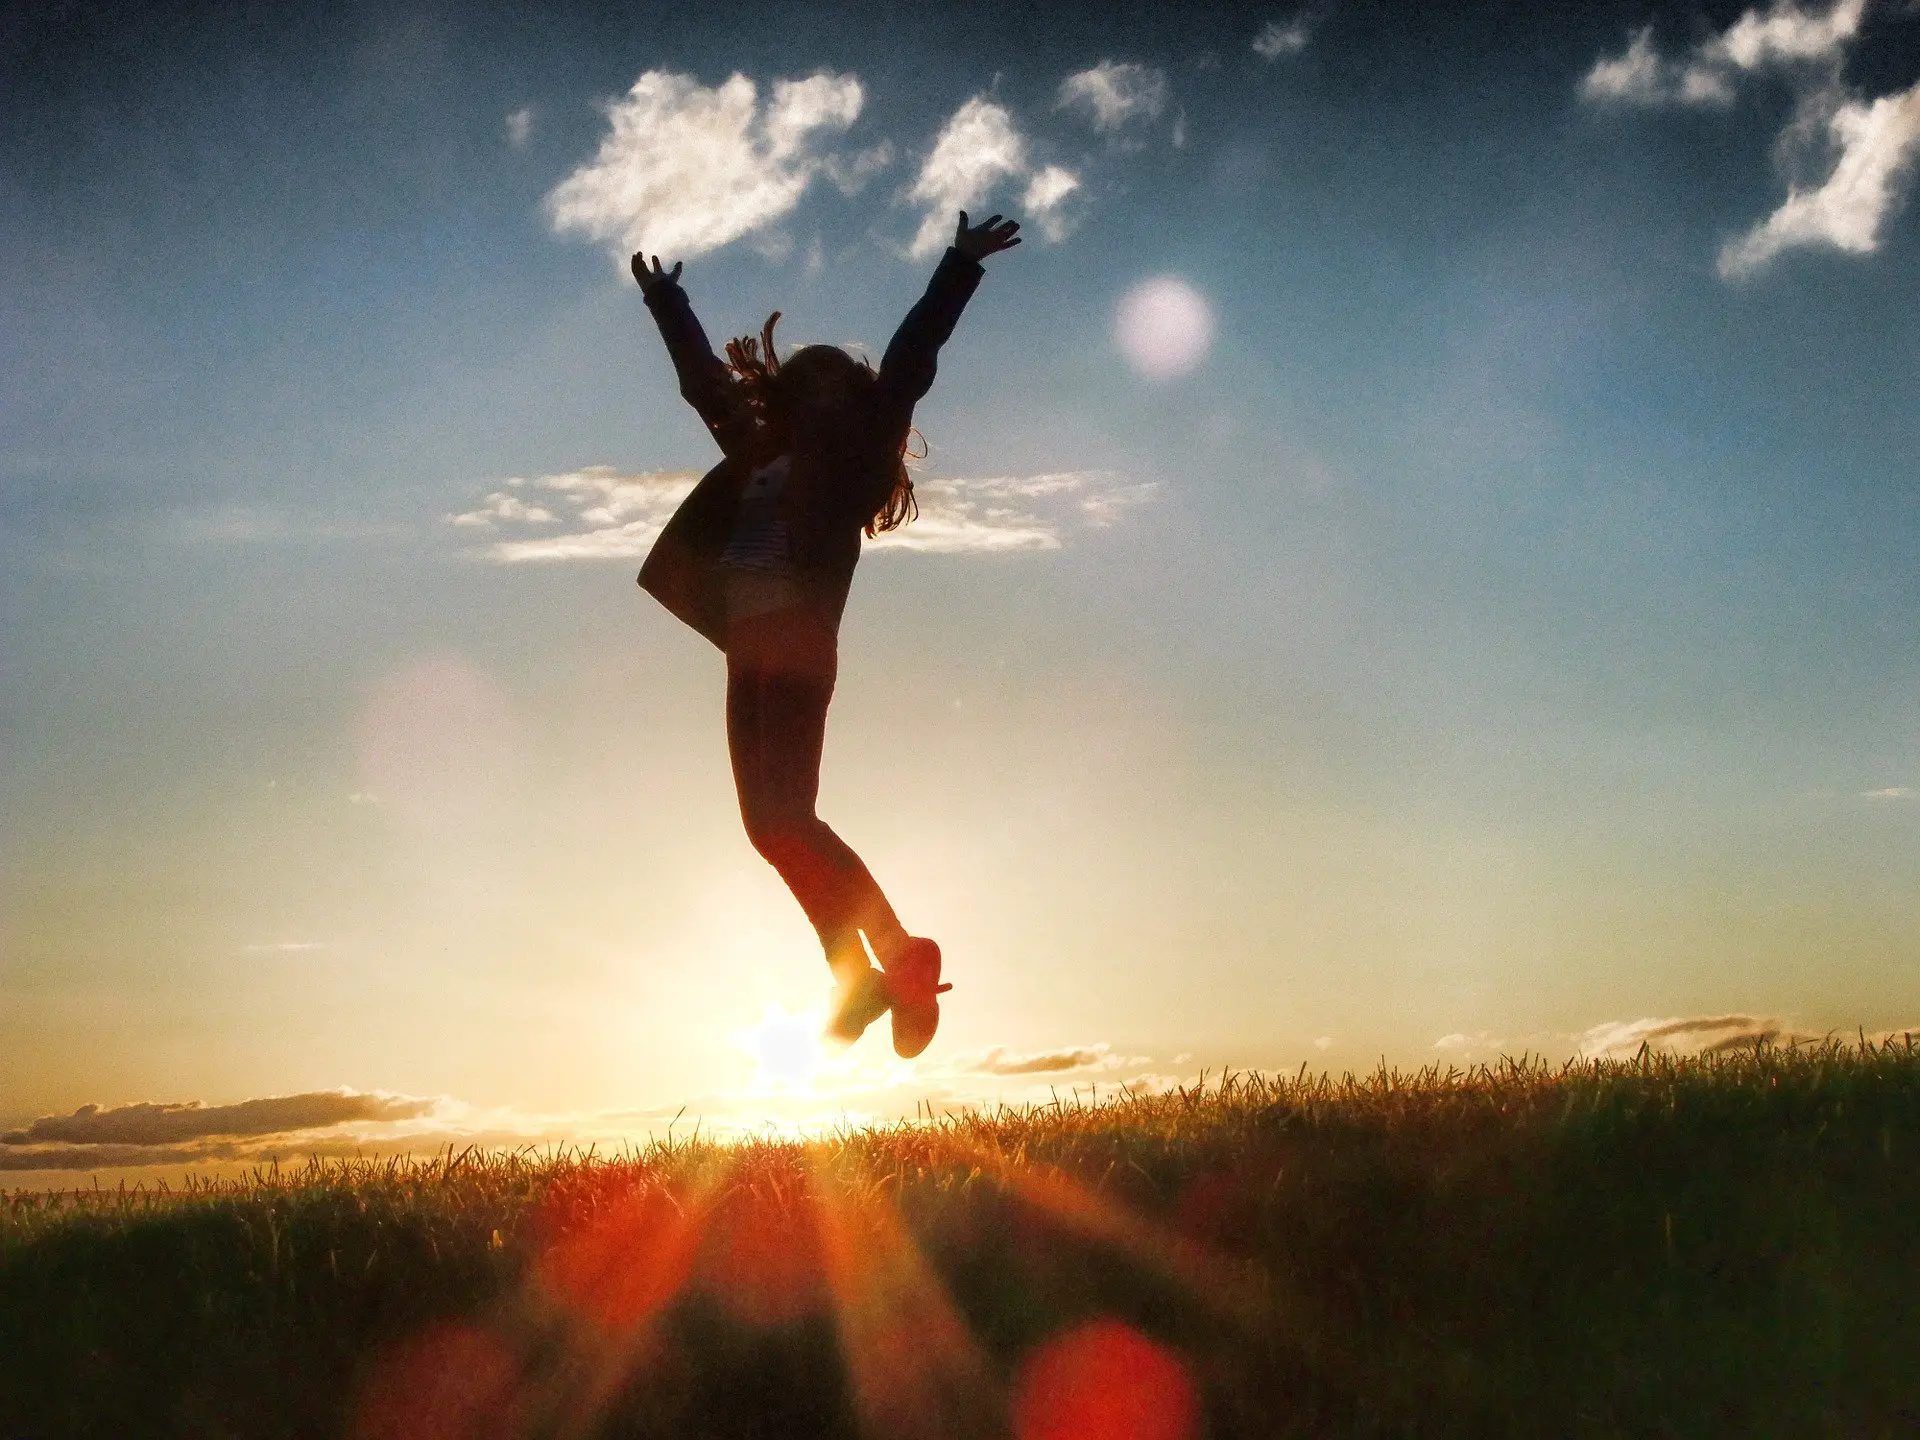 A woman jumping for joy during the sunset.